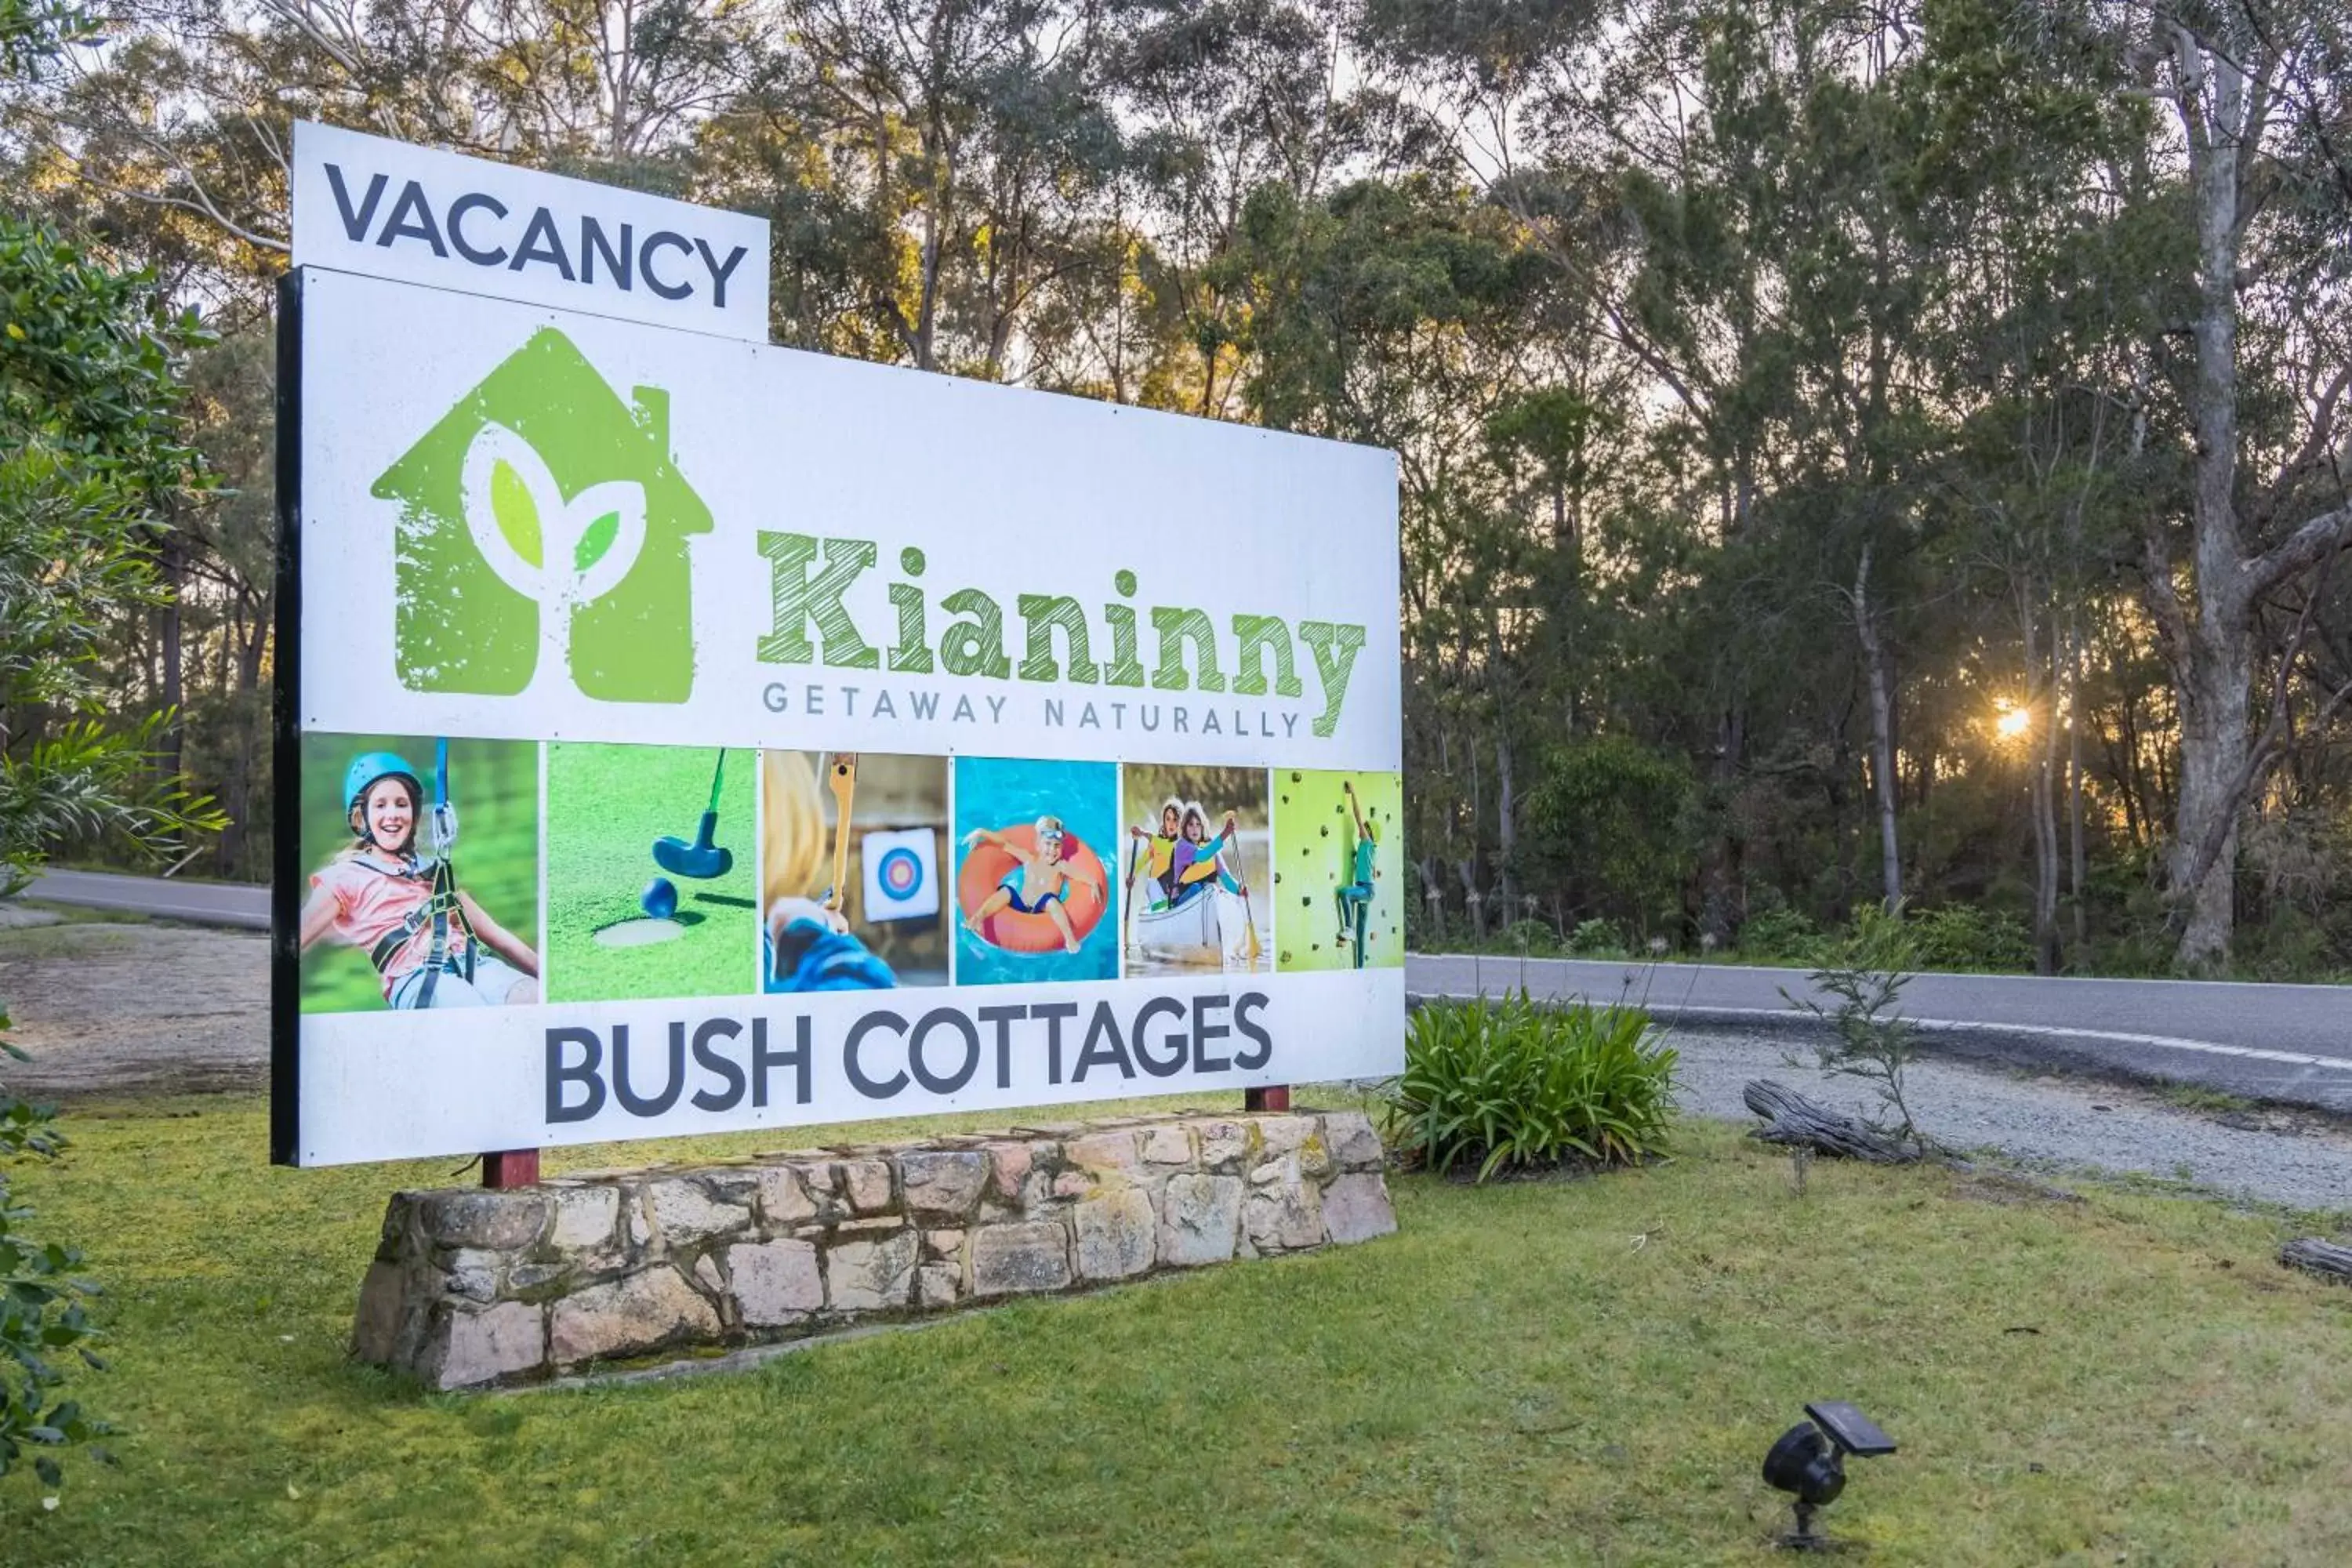 Property logo or sign, Property Logo/Sign in Kianinny Bush Cottages